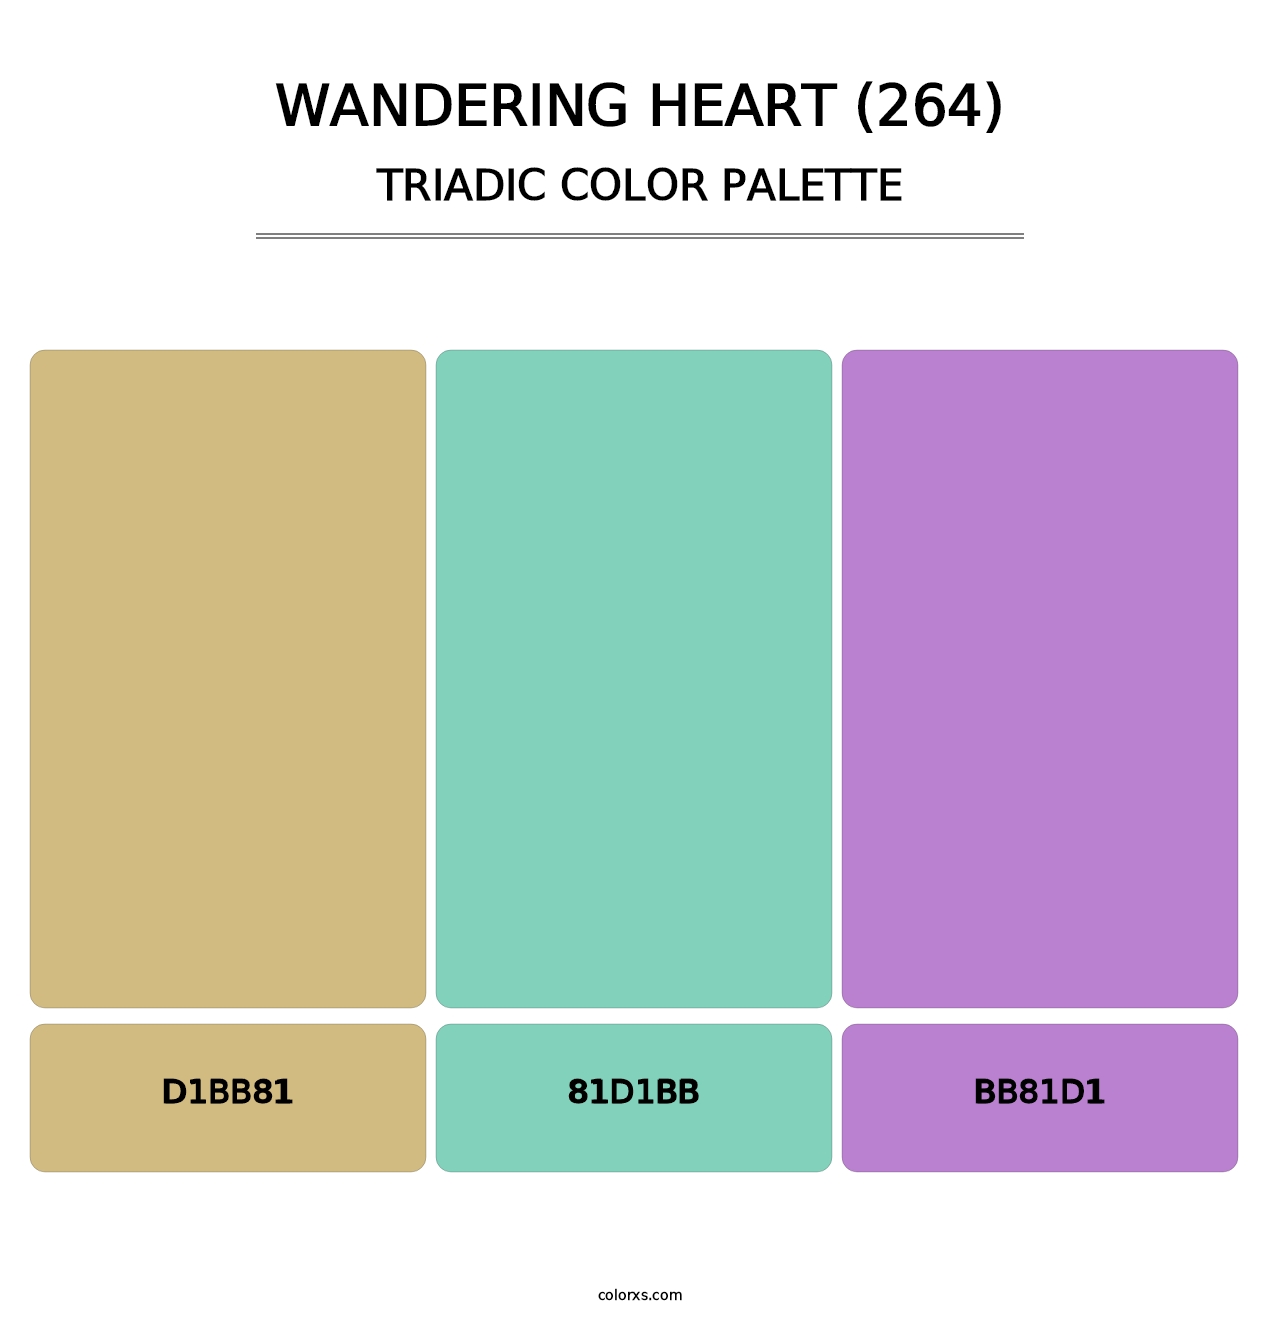 Wandering Heart (264) - Triadic Color Palette